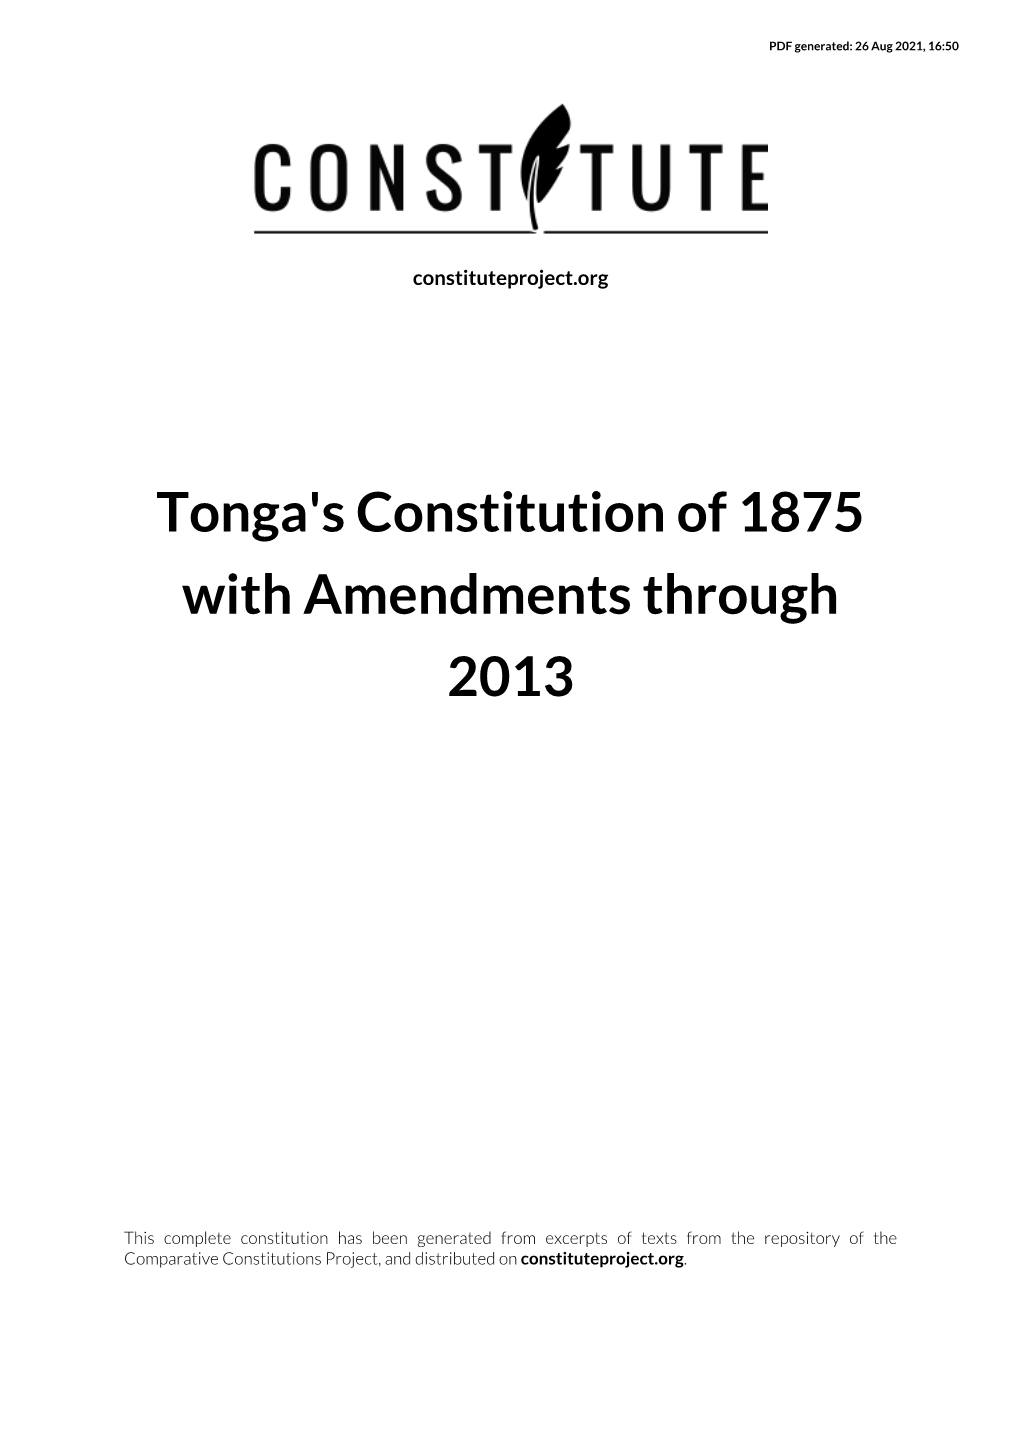 Tonga's Constitution of 1875 with Amendments Through 2013